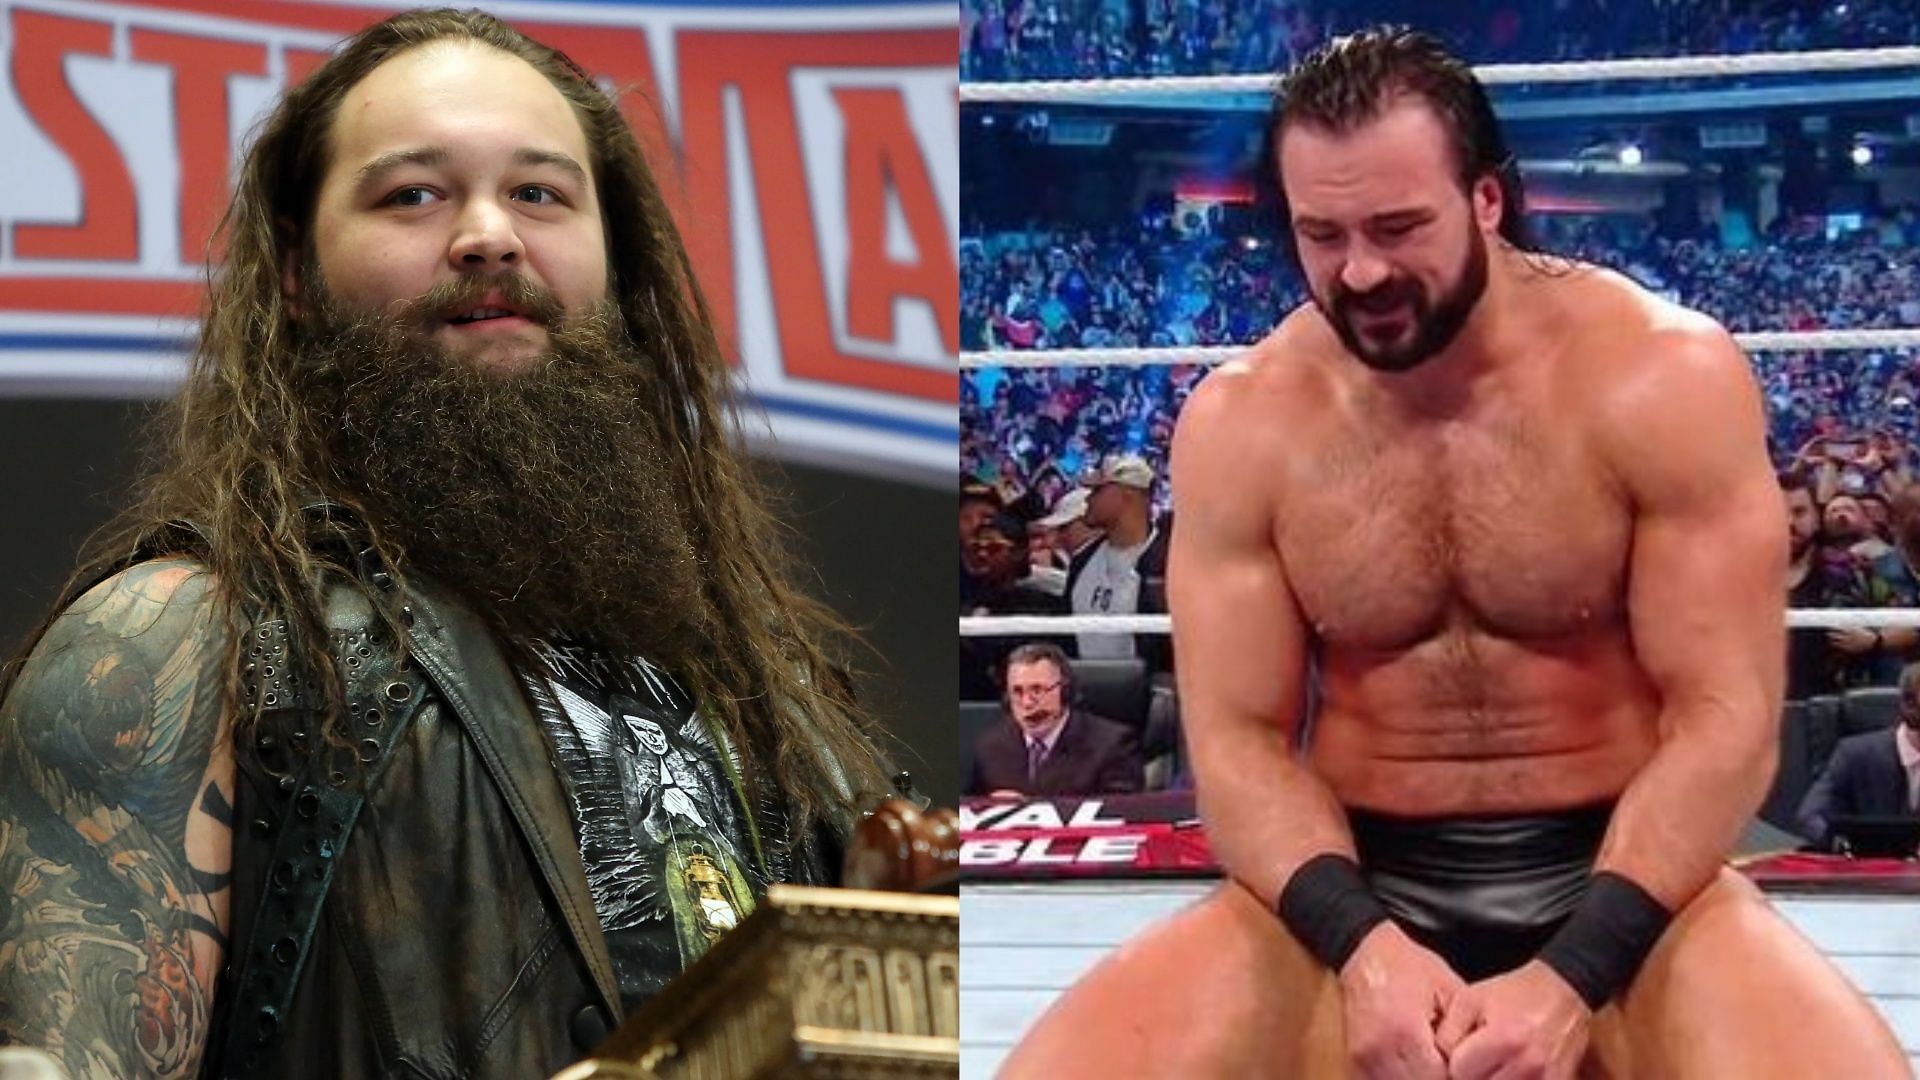 Bray Wyatt and Drew McIntyre both started their WWE careers at FCW.